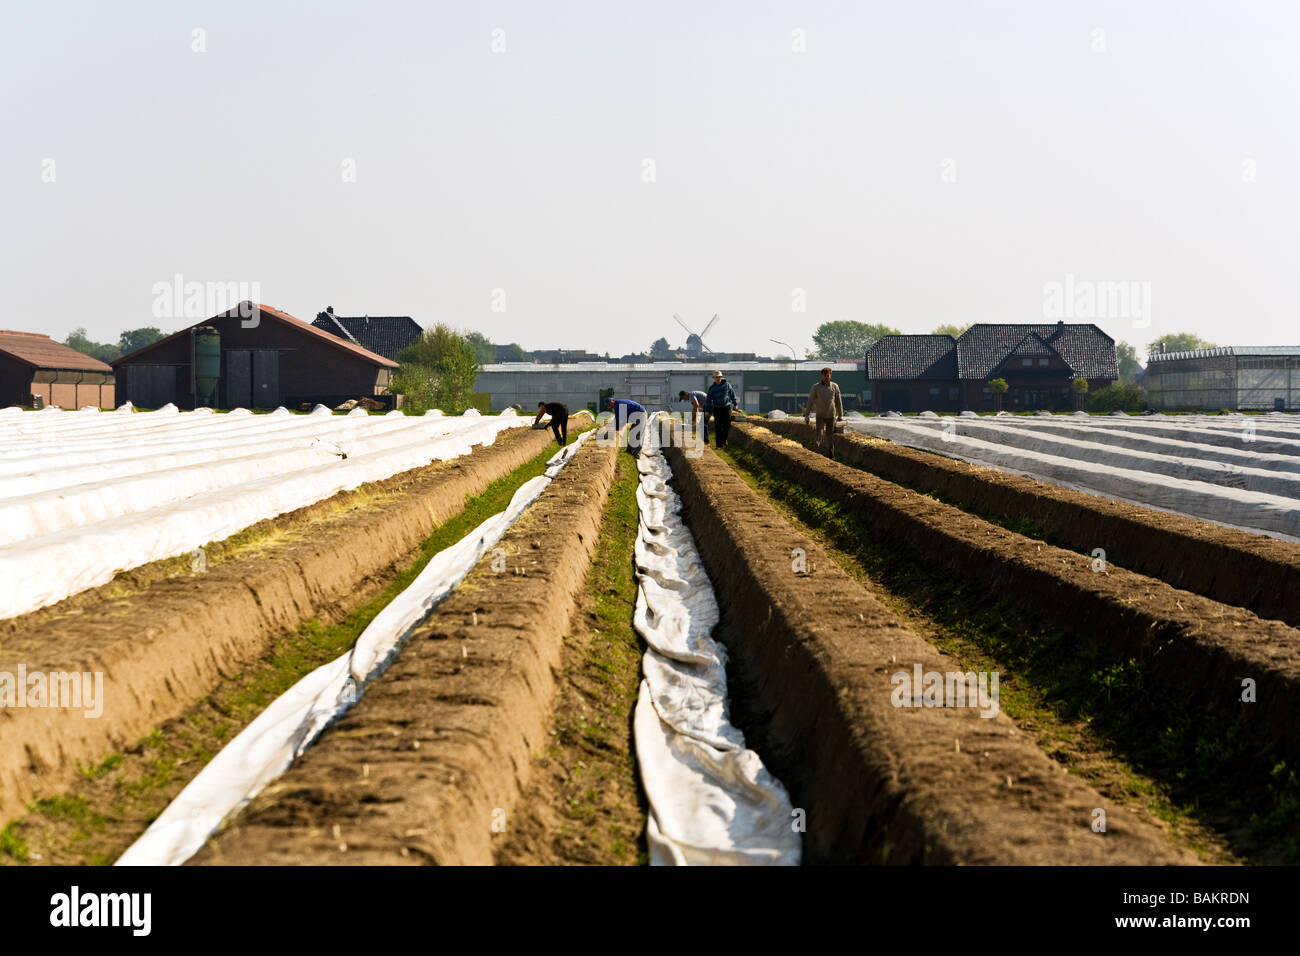 early morning asparagus harvesting at Walbeck, lower rhine region, Germany Stock Photo